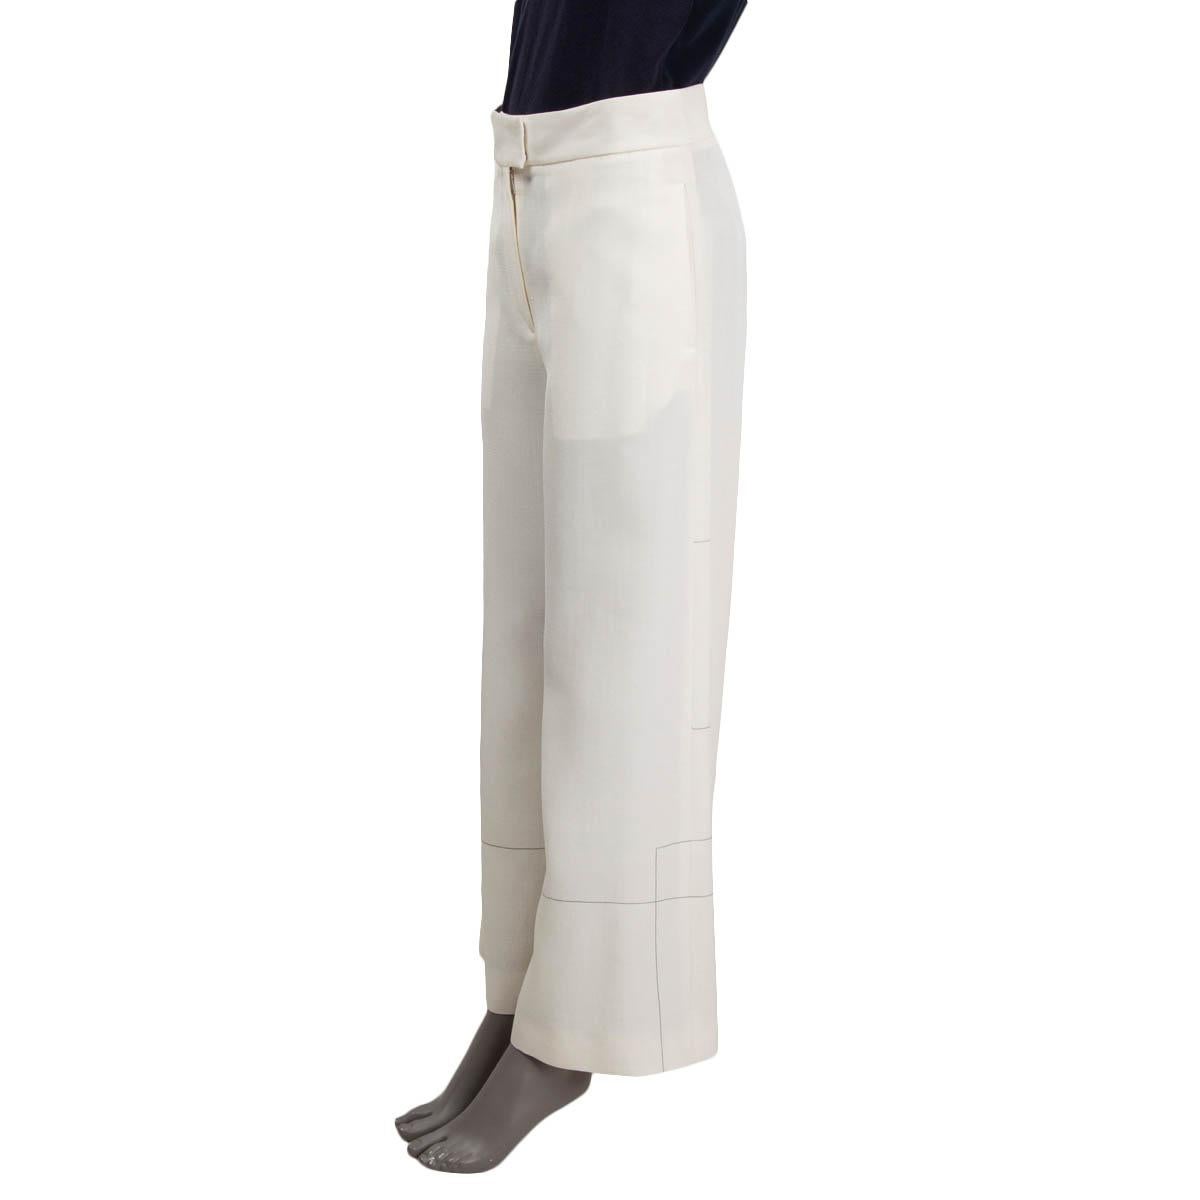 100% authentic Céline by Phoebe Philo wide-leg pants in ivory viscose (57%) and silk (43%). Features thin stripe print, two pockets on the sides, and one buttoned welt-pocket on the back. Opens with a concealed zipper and two hook on the front.